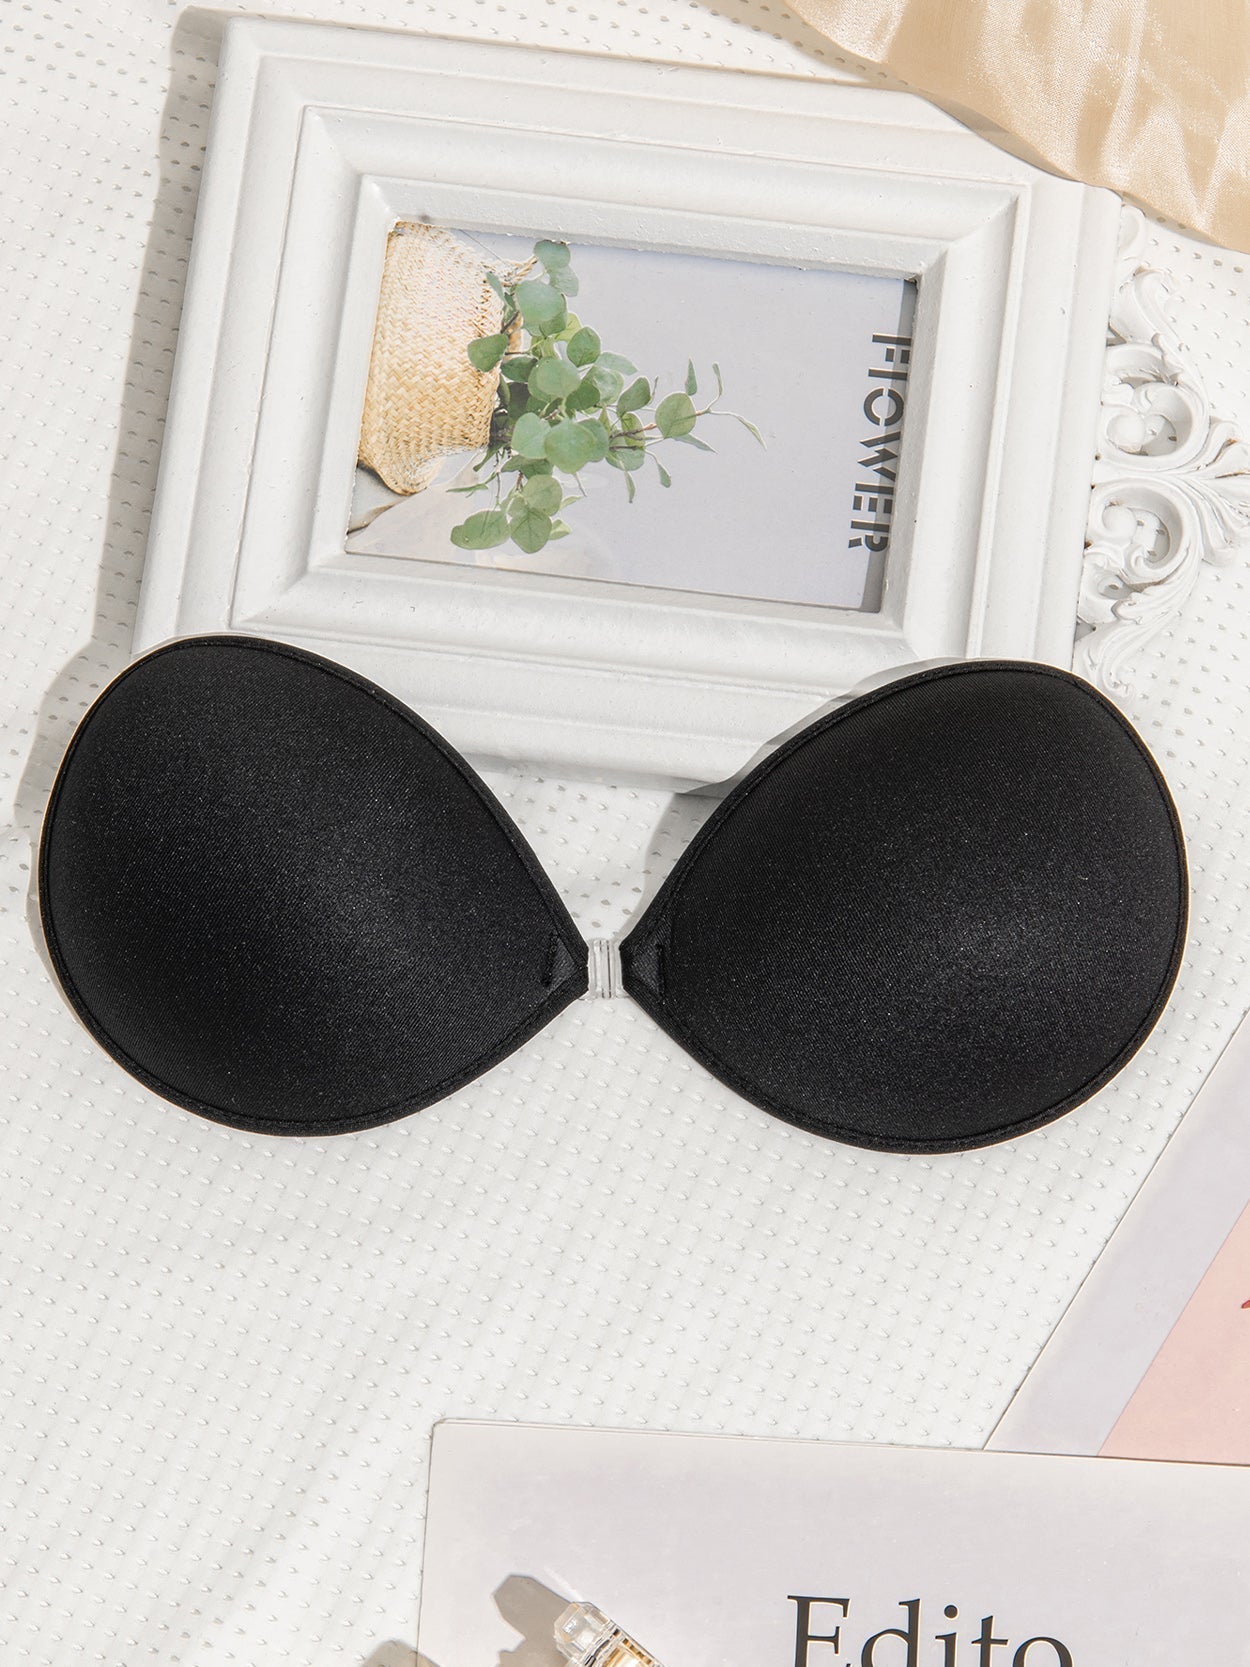 Wingslove Adhesive Bra Reusable Strapless Self Silicone Push-up